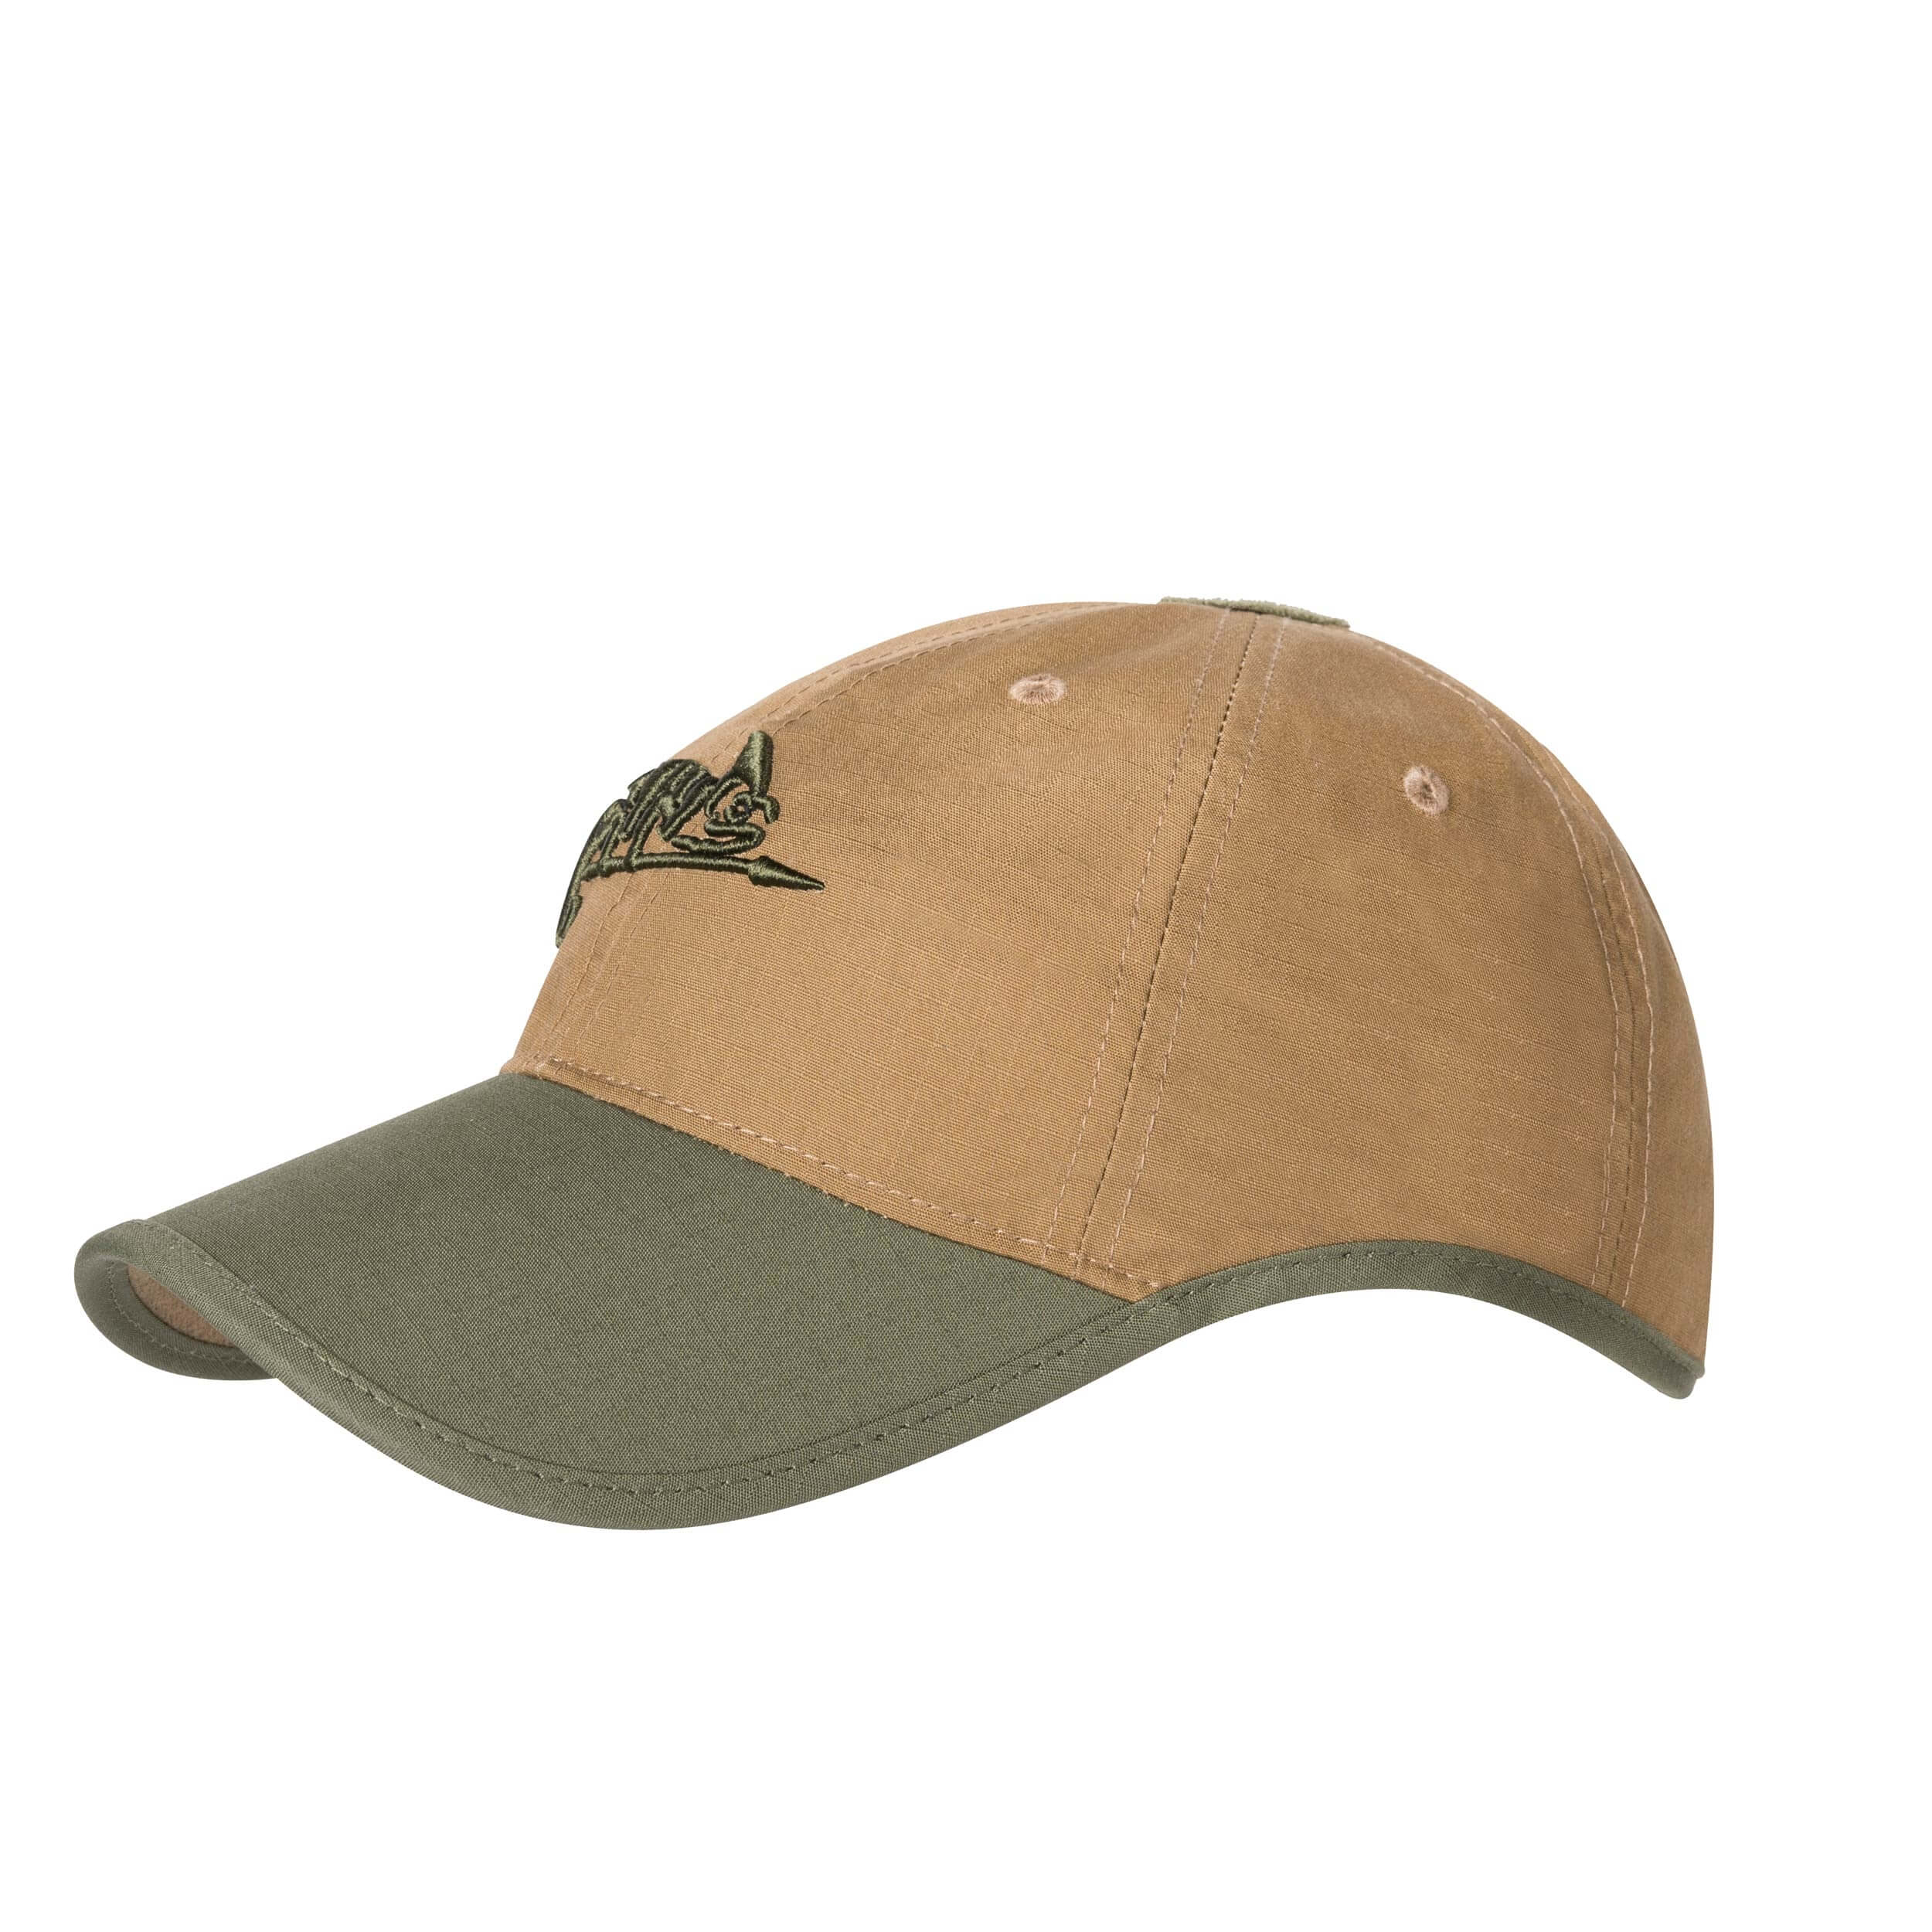 Helikon-Tex Logo Cap -PolyCotton Ripstop- Coyote / Olive Green A